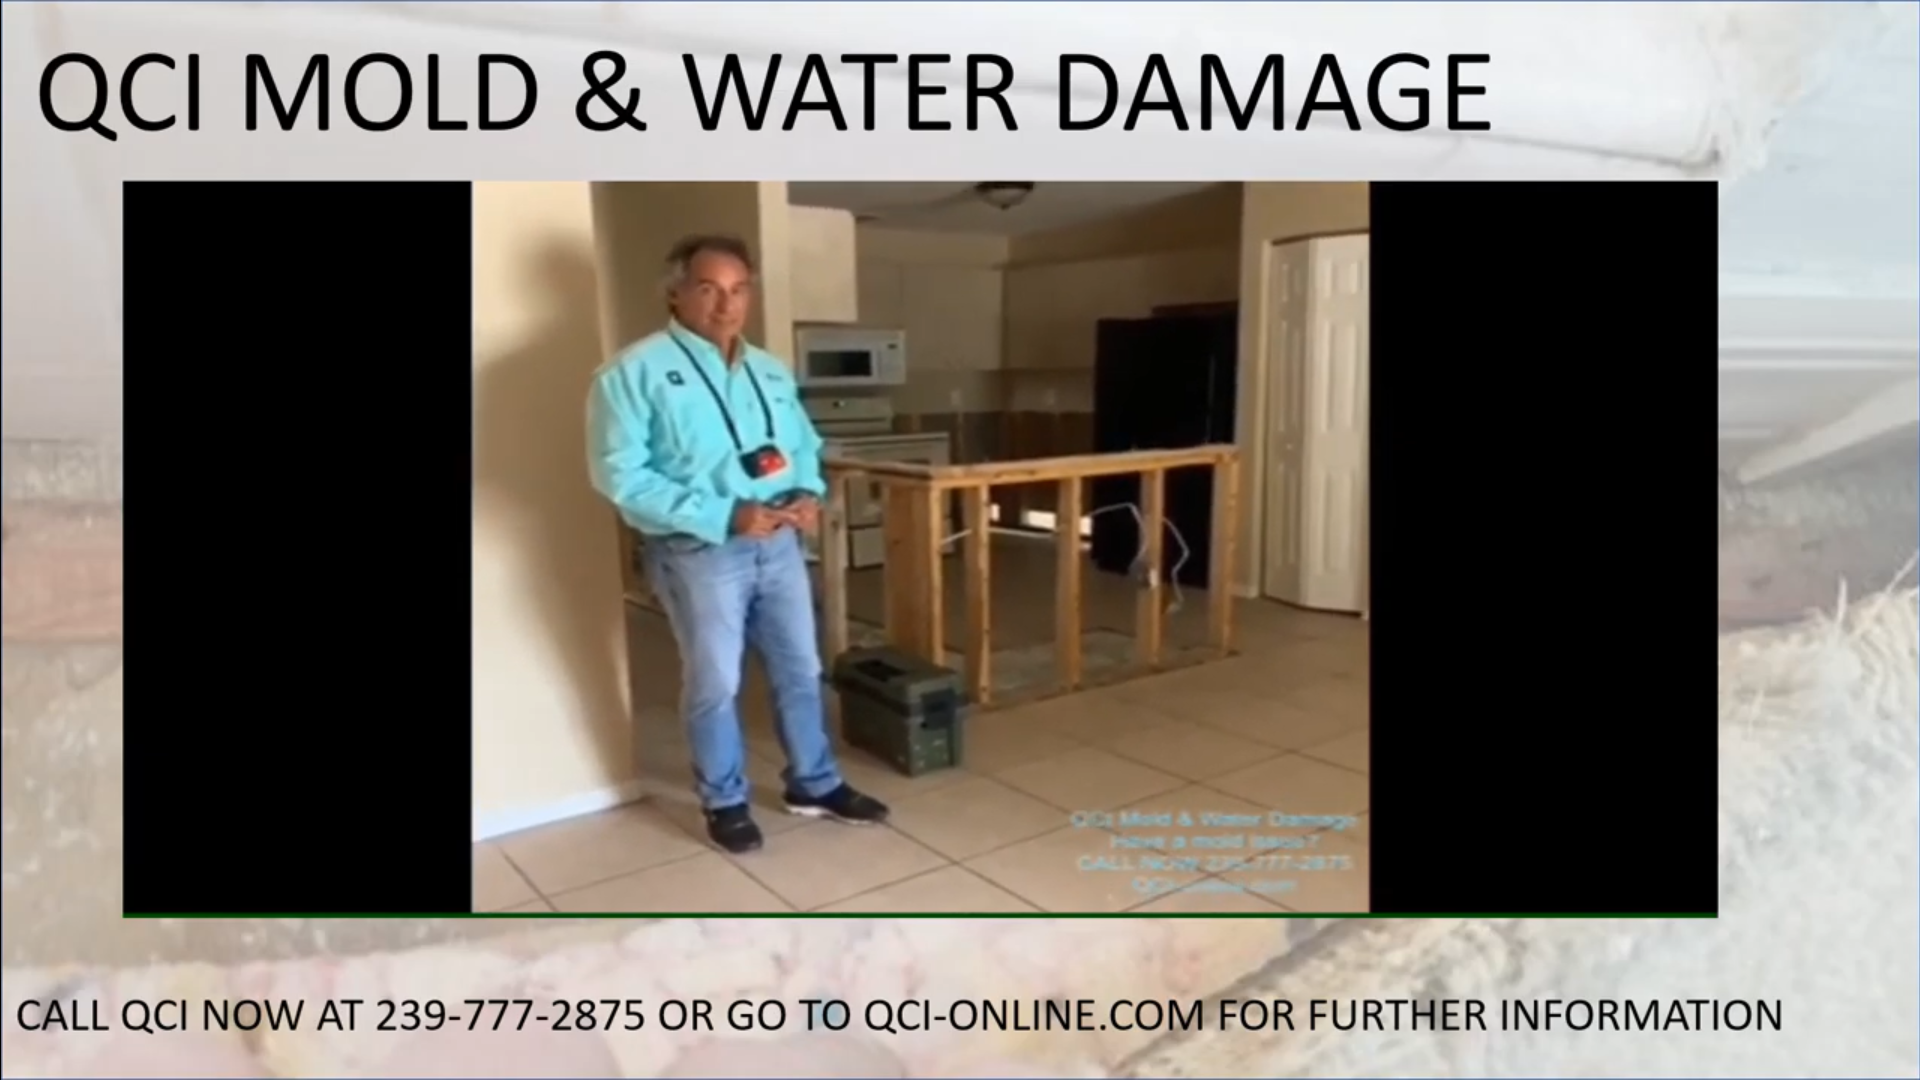 NEW YOUTUBE VIDEO IS LIVE - GO CHECK IT OUT!!
QCI Mold & Water Damage Mold Inspection and Testing Ju QCI Mold and Water Damage Naples (239)777-2875